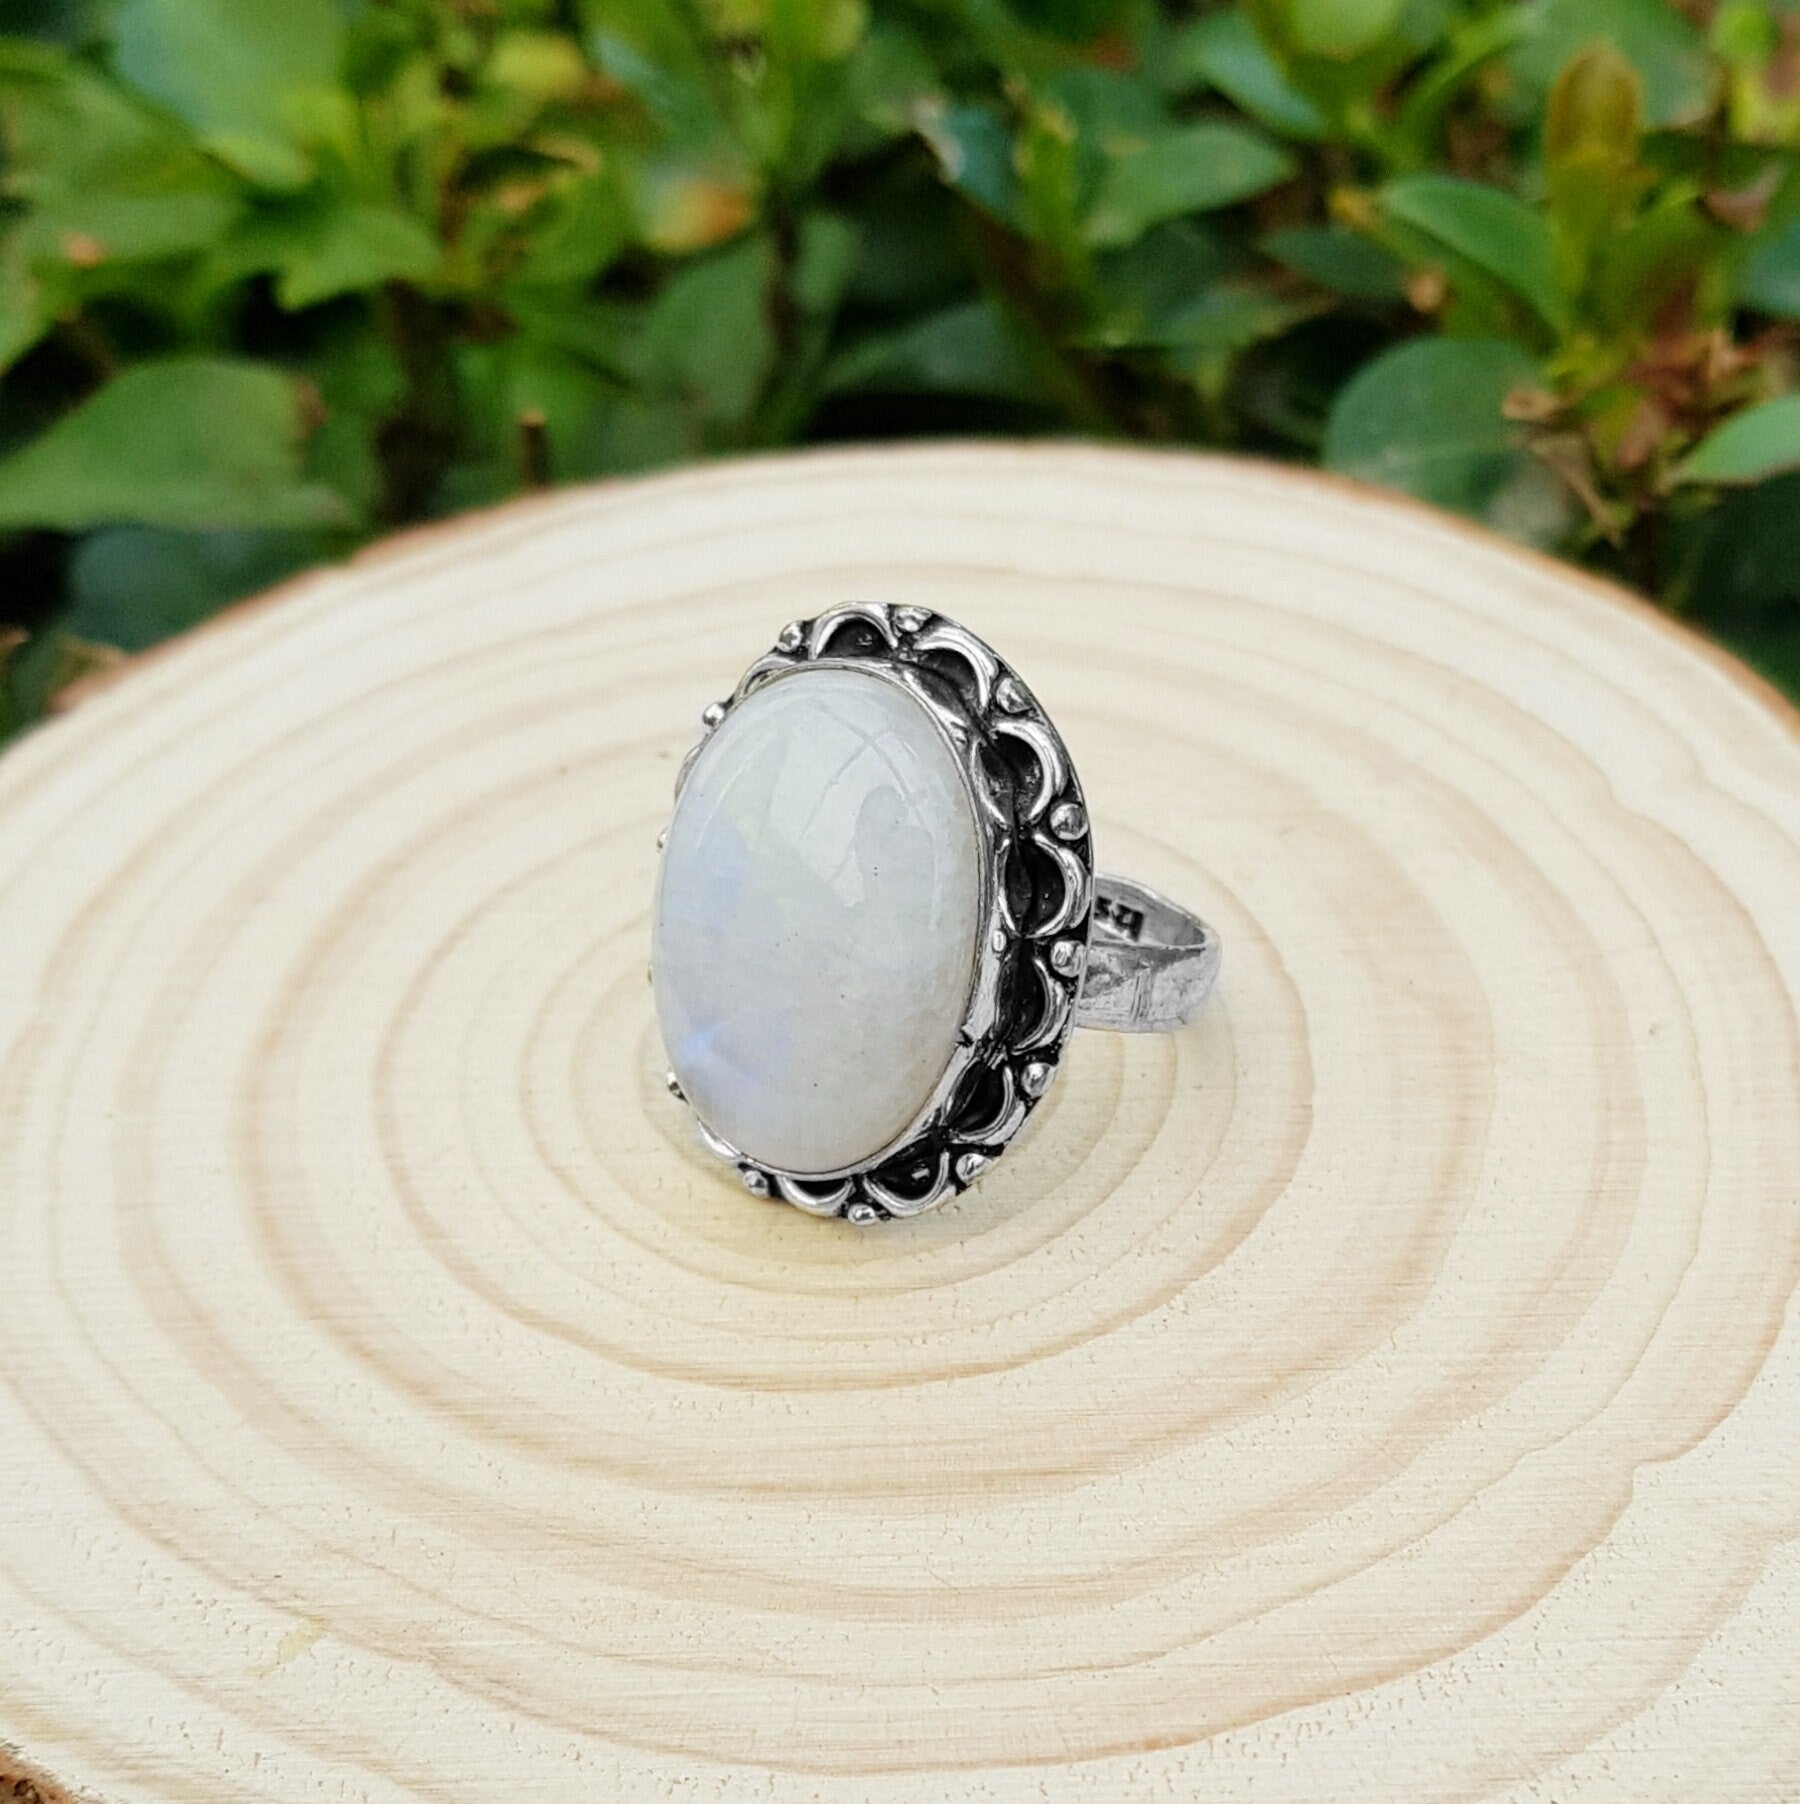 Rainbow Moonstone Statement Ring Sterling Silver Boho Rings Size US 8 Unique Jewelry One Of A Kind Gift GypsyJewelry